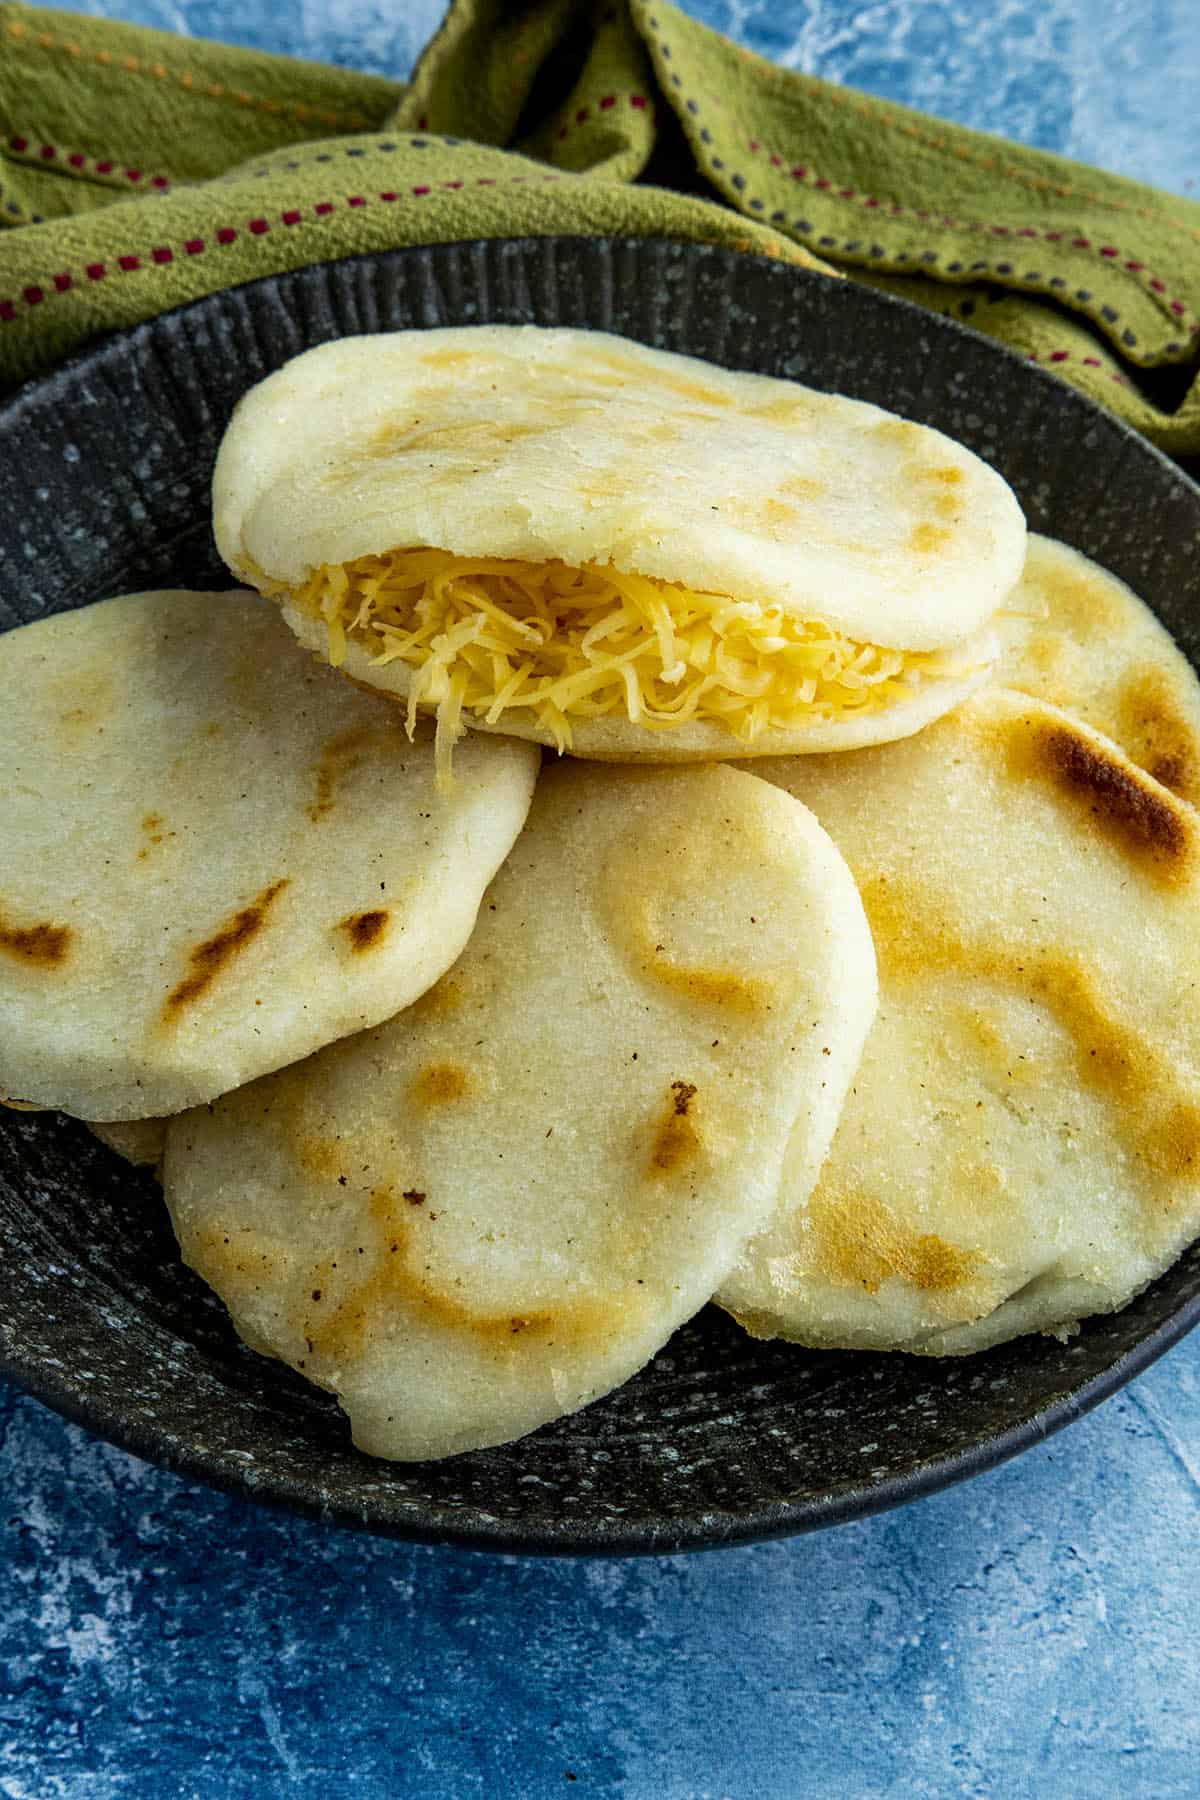 Arepas con queso, arepas stuffed with cheese